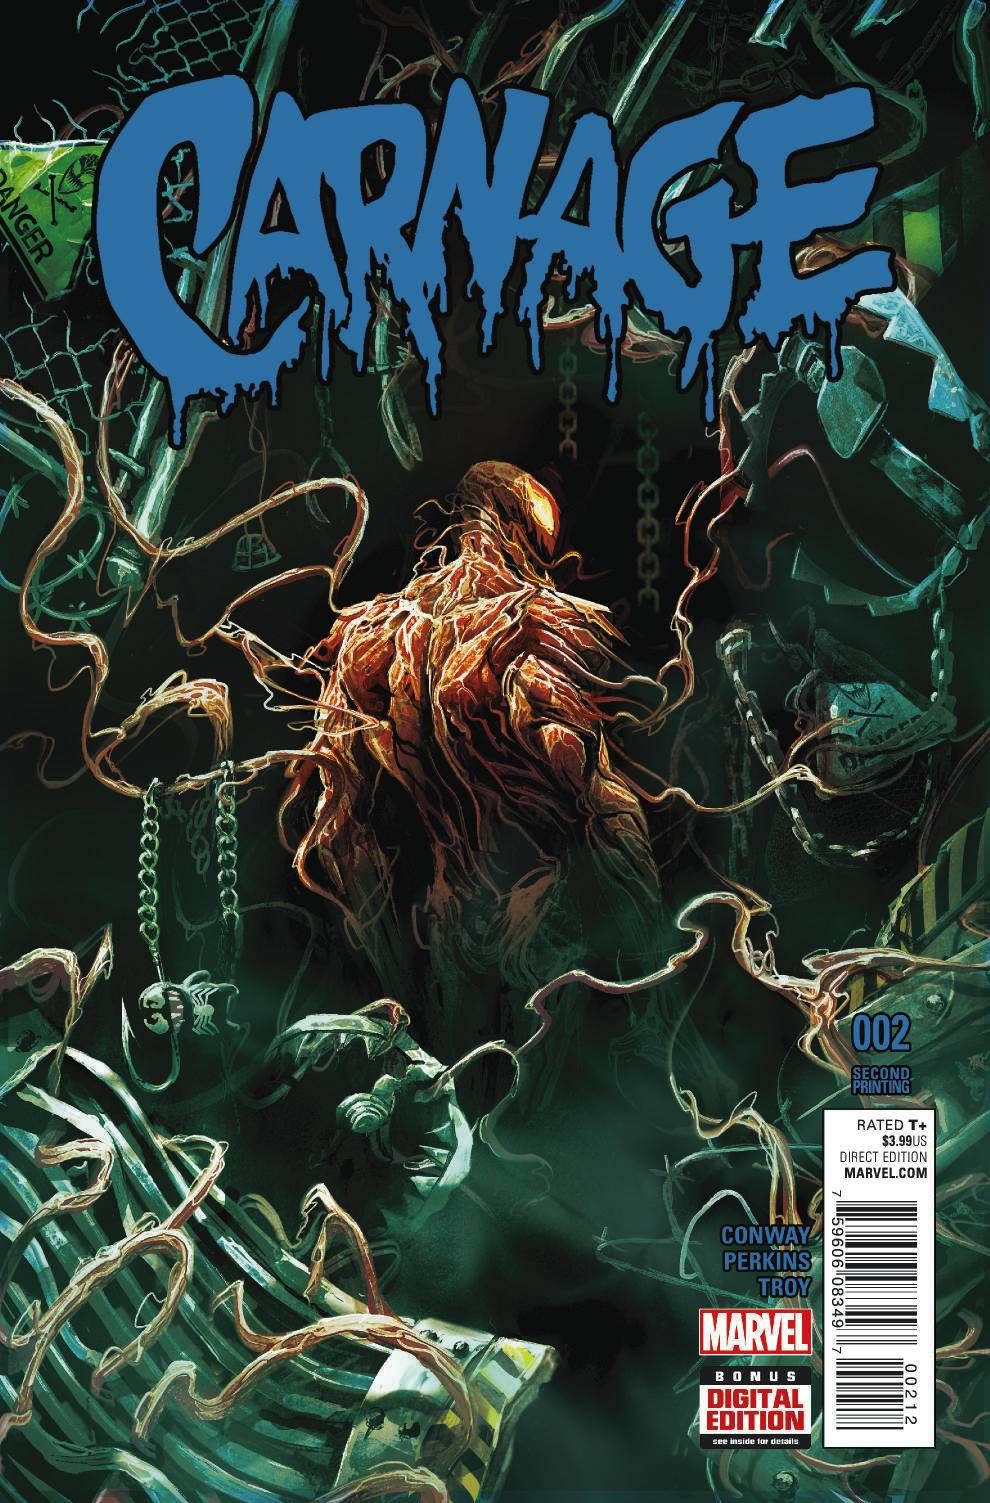 2016 1ST PRINT CARNAGE NM CONWAY PERKINS TROY #1 